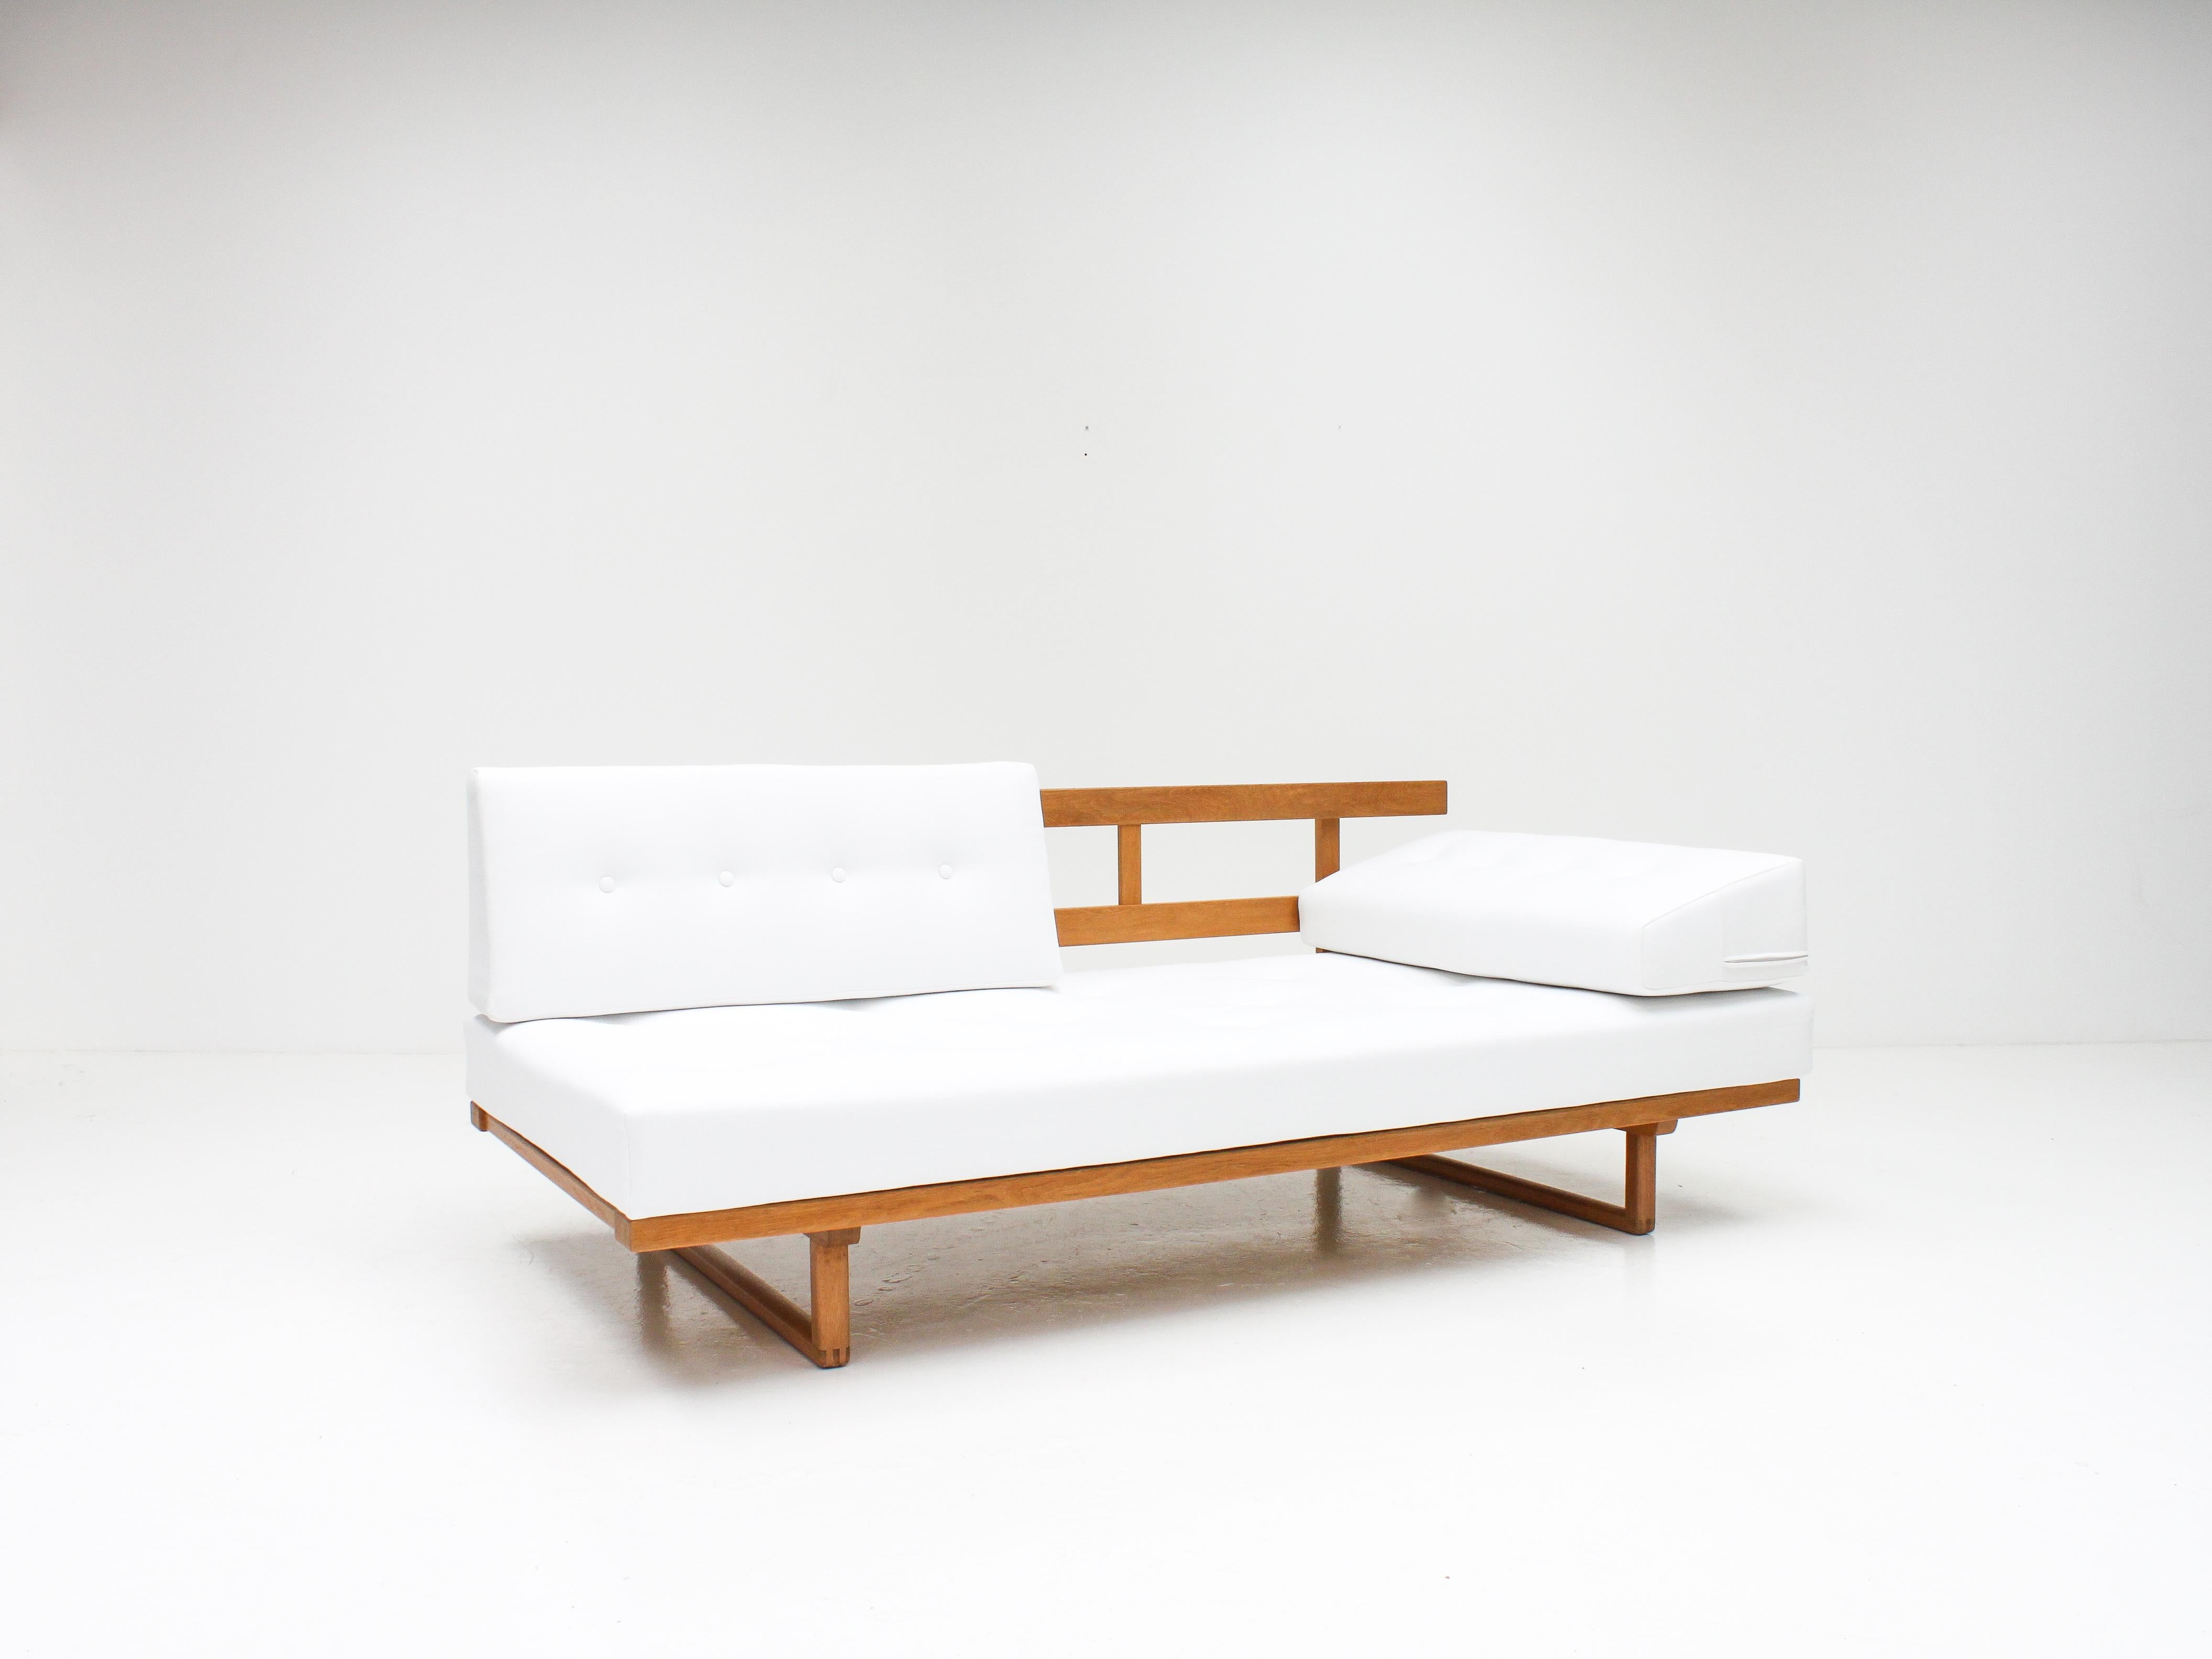 A beautiful and hard to find Børge Mogensen sofa / daybed model 4311/4312 for Fredericia Stolefabrik, Denmark, 1965.

The daybed is executed in solid oak, exposed wooden joints, a slatted frame with feature brass fittings and recovered in new